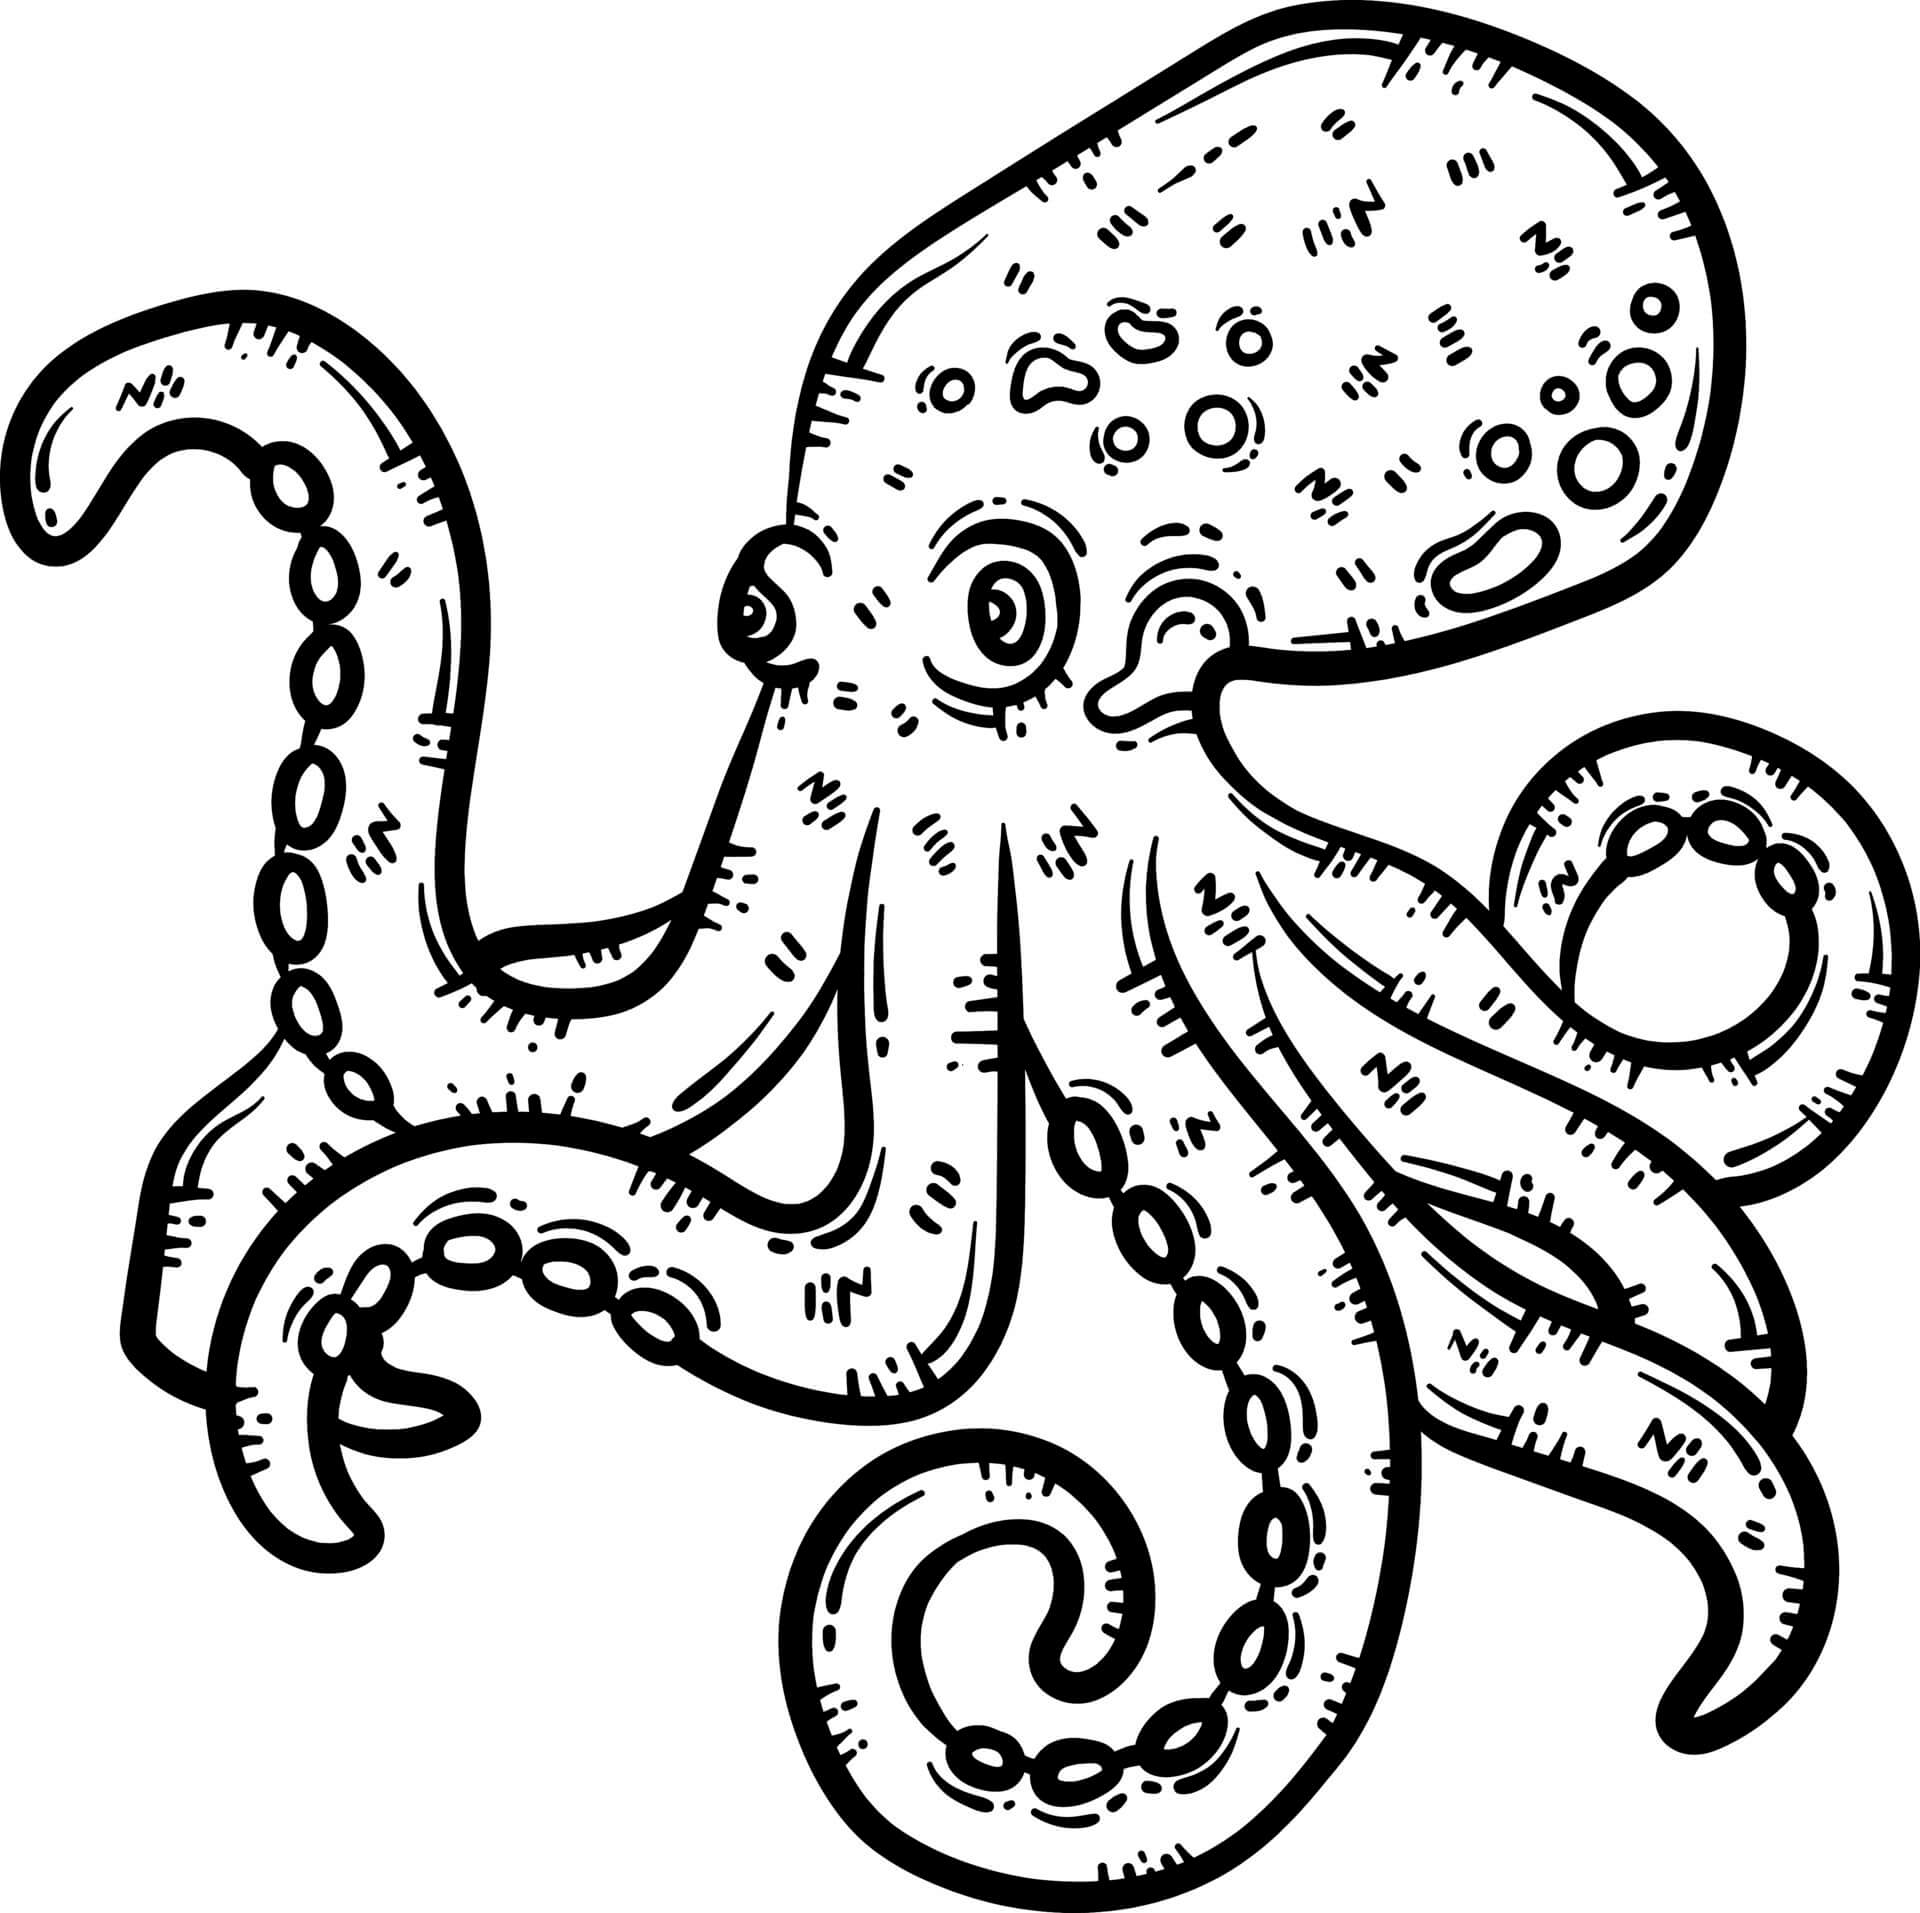 Drawing Octopus coloring page - Download, Print or Color Online for Free